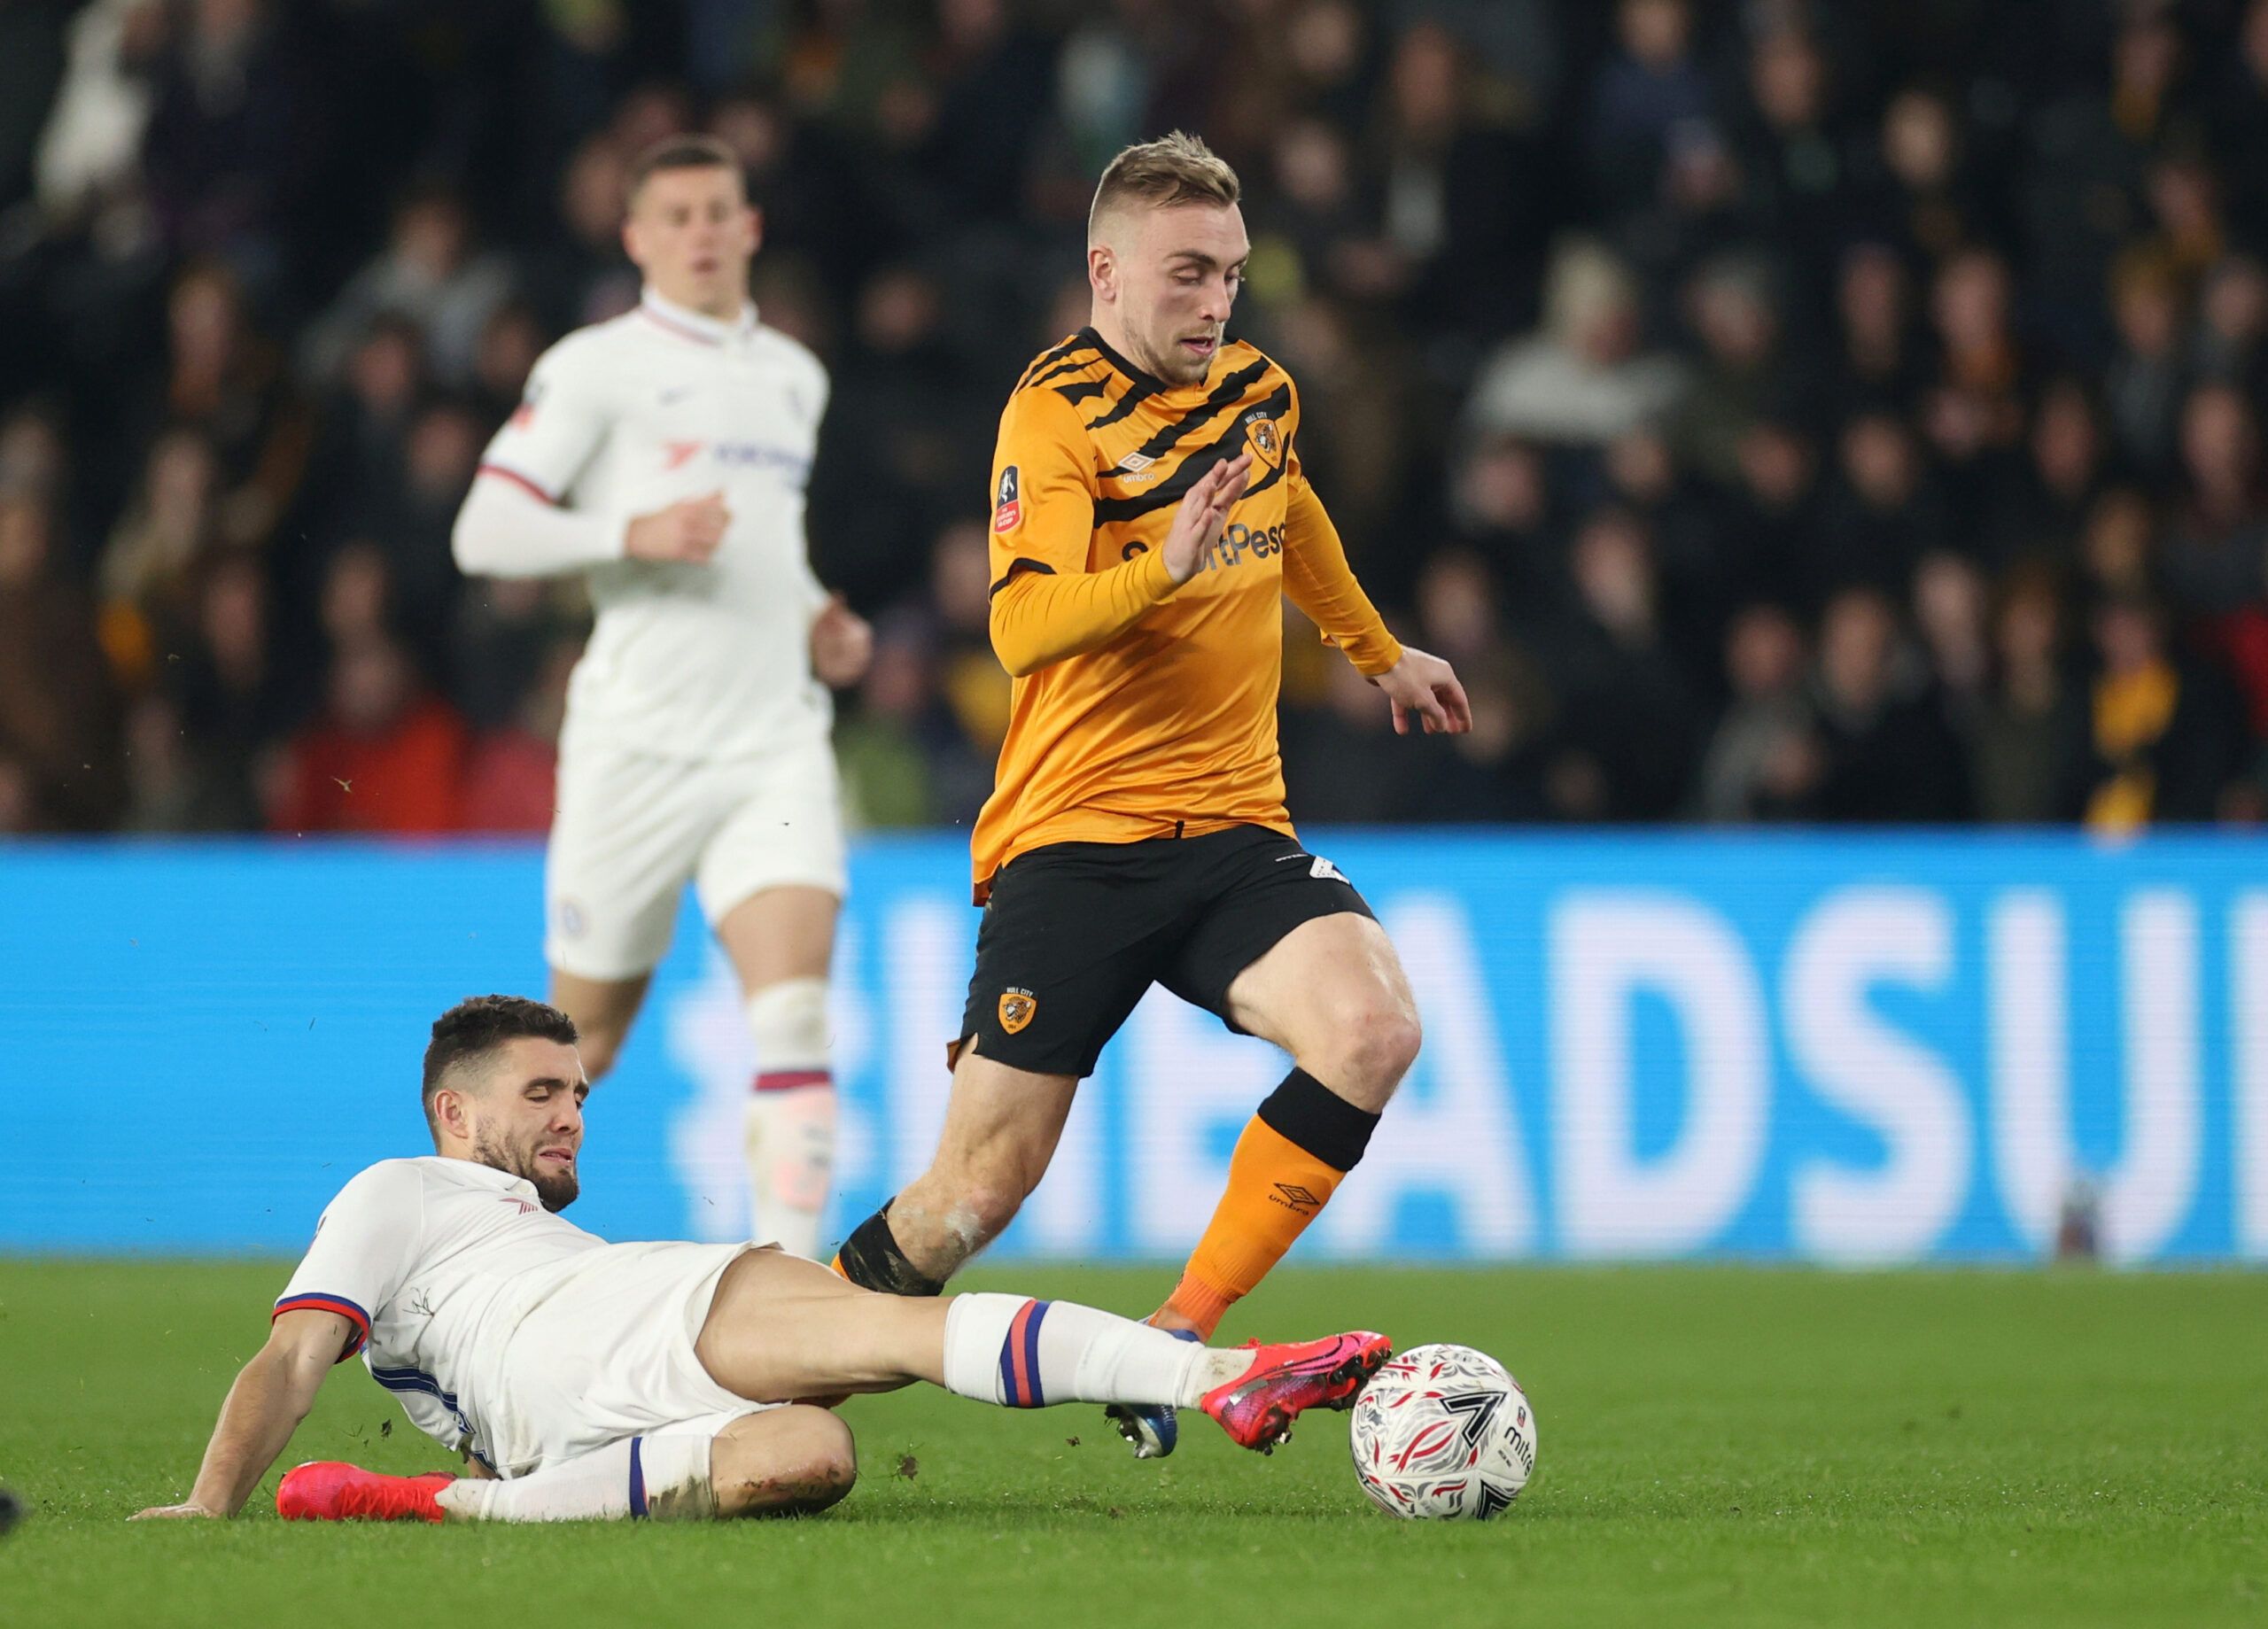 Soccer Football - FA Cup Fourth Round - Hull City v Chelsea - KCOM Stadium, Hull, Britain - January 25, 2020  Chelsea's Mateo Kovacic fouls Hull City's Jarrod Bowen and is subsequently shown a yellow card by referee Craig Pawson    Action Images via Reuters/Carl Recine